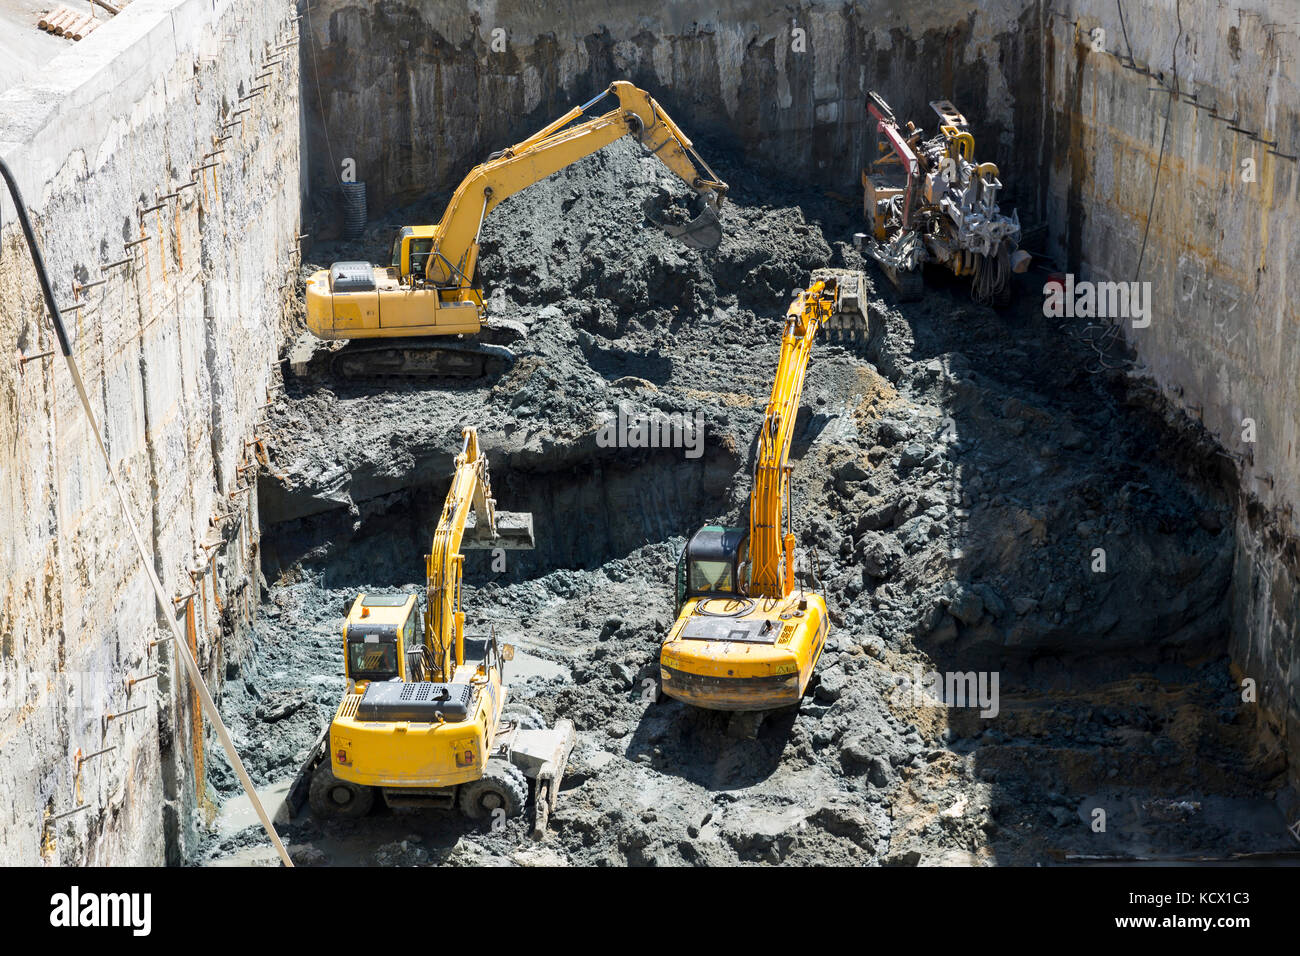 Excavators dig at a construction site of a street and a subway. Baggers transport dirt to a higher level to make room for the subway digging machine.  Stock Photo